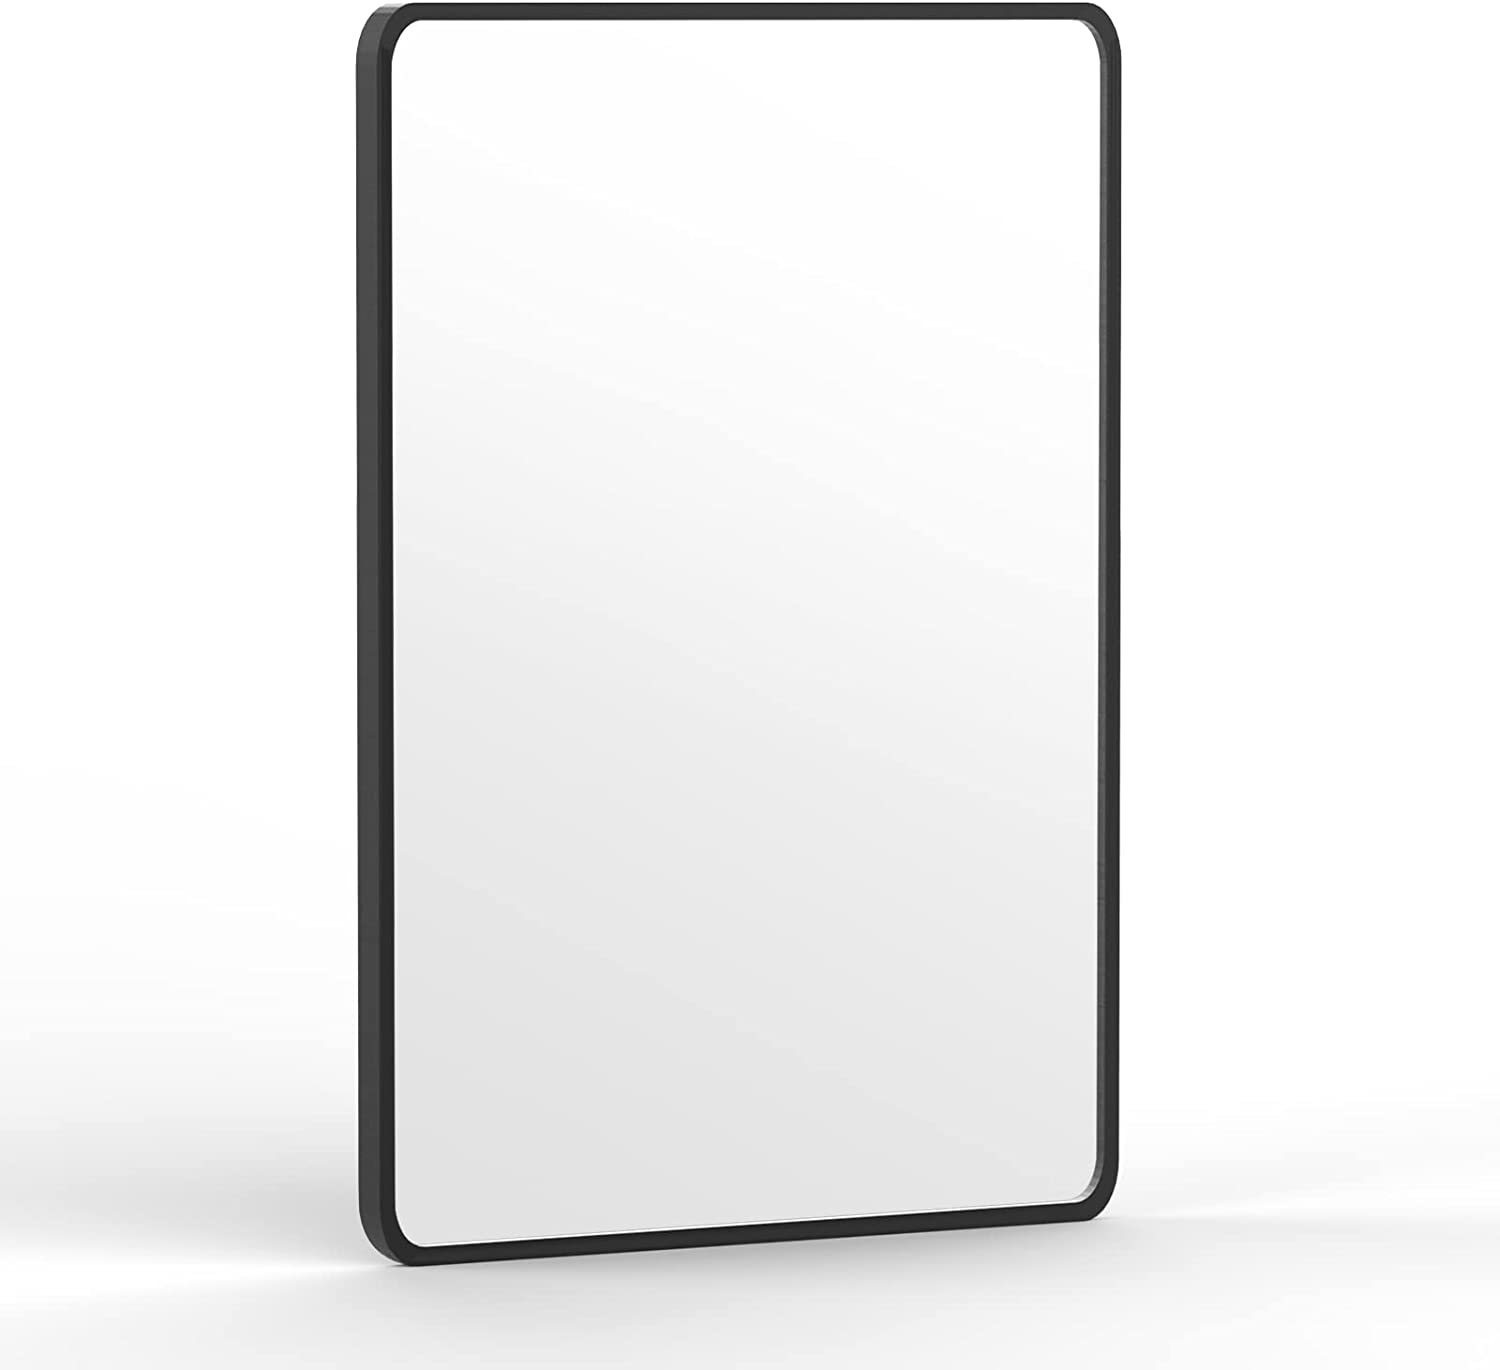 ''Modern 24''''x36'''' Black MIRROR for Bathroom, Framed Rectangle MIRROR with Rounded Corner, Metal Blac